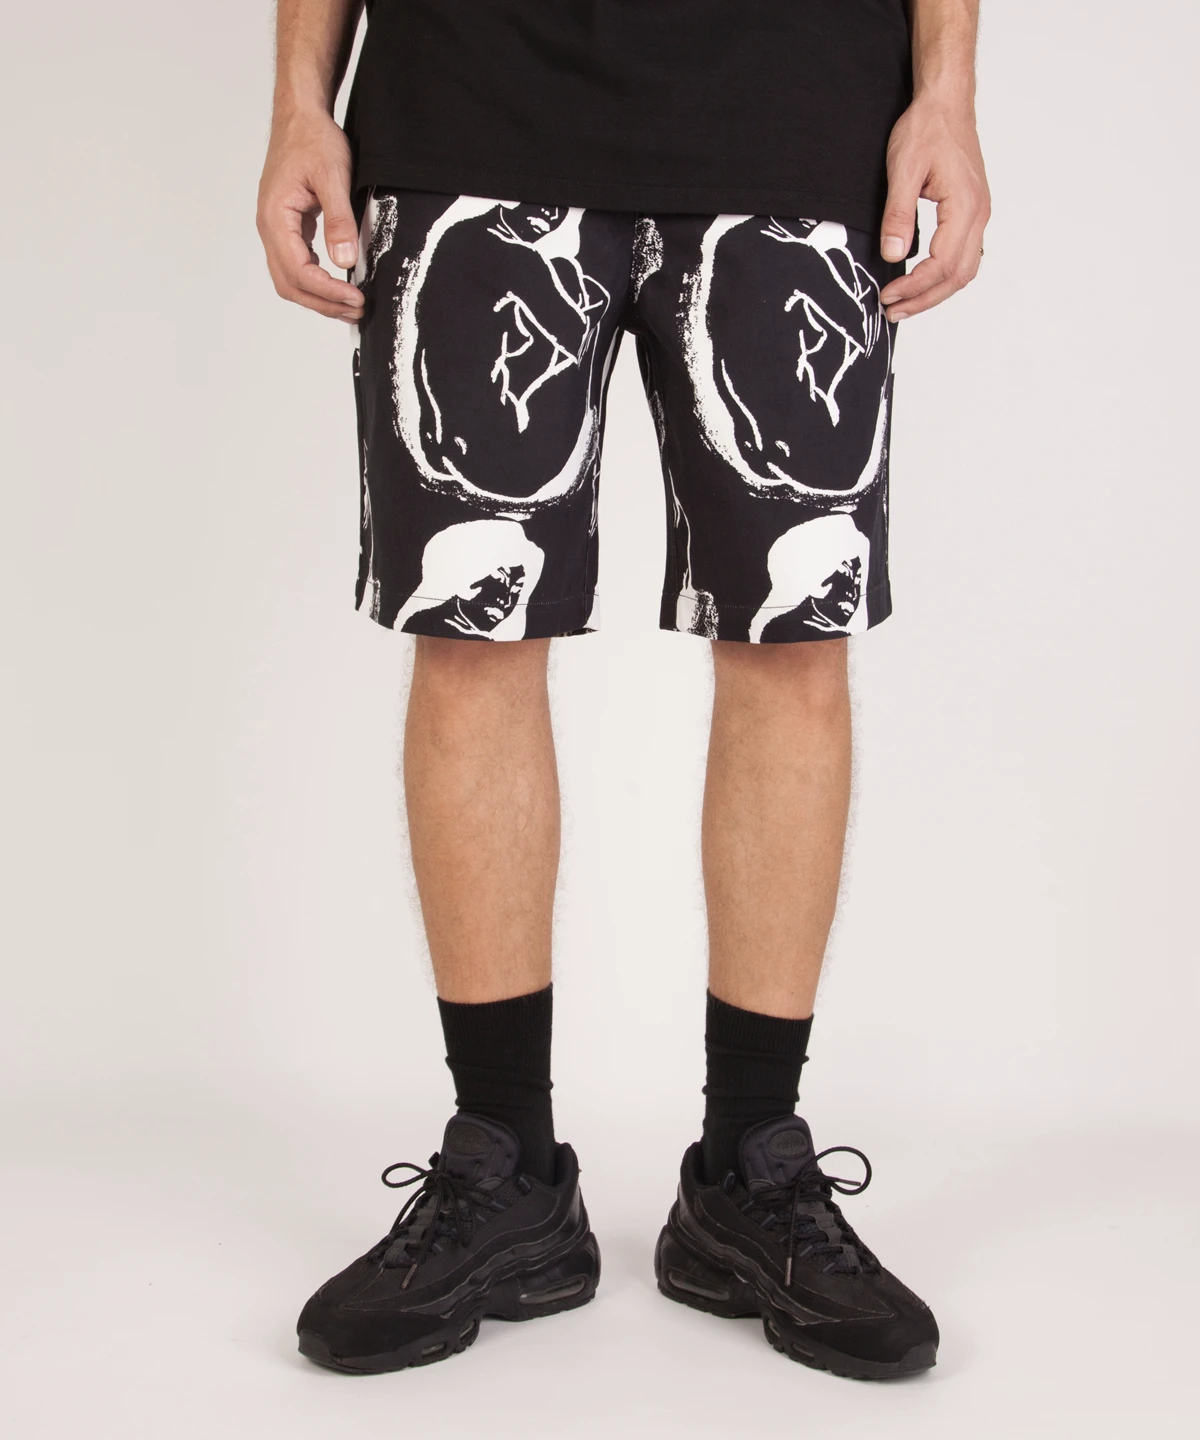 grindlondon not for you 100% cotton printed short